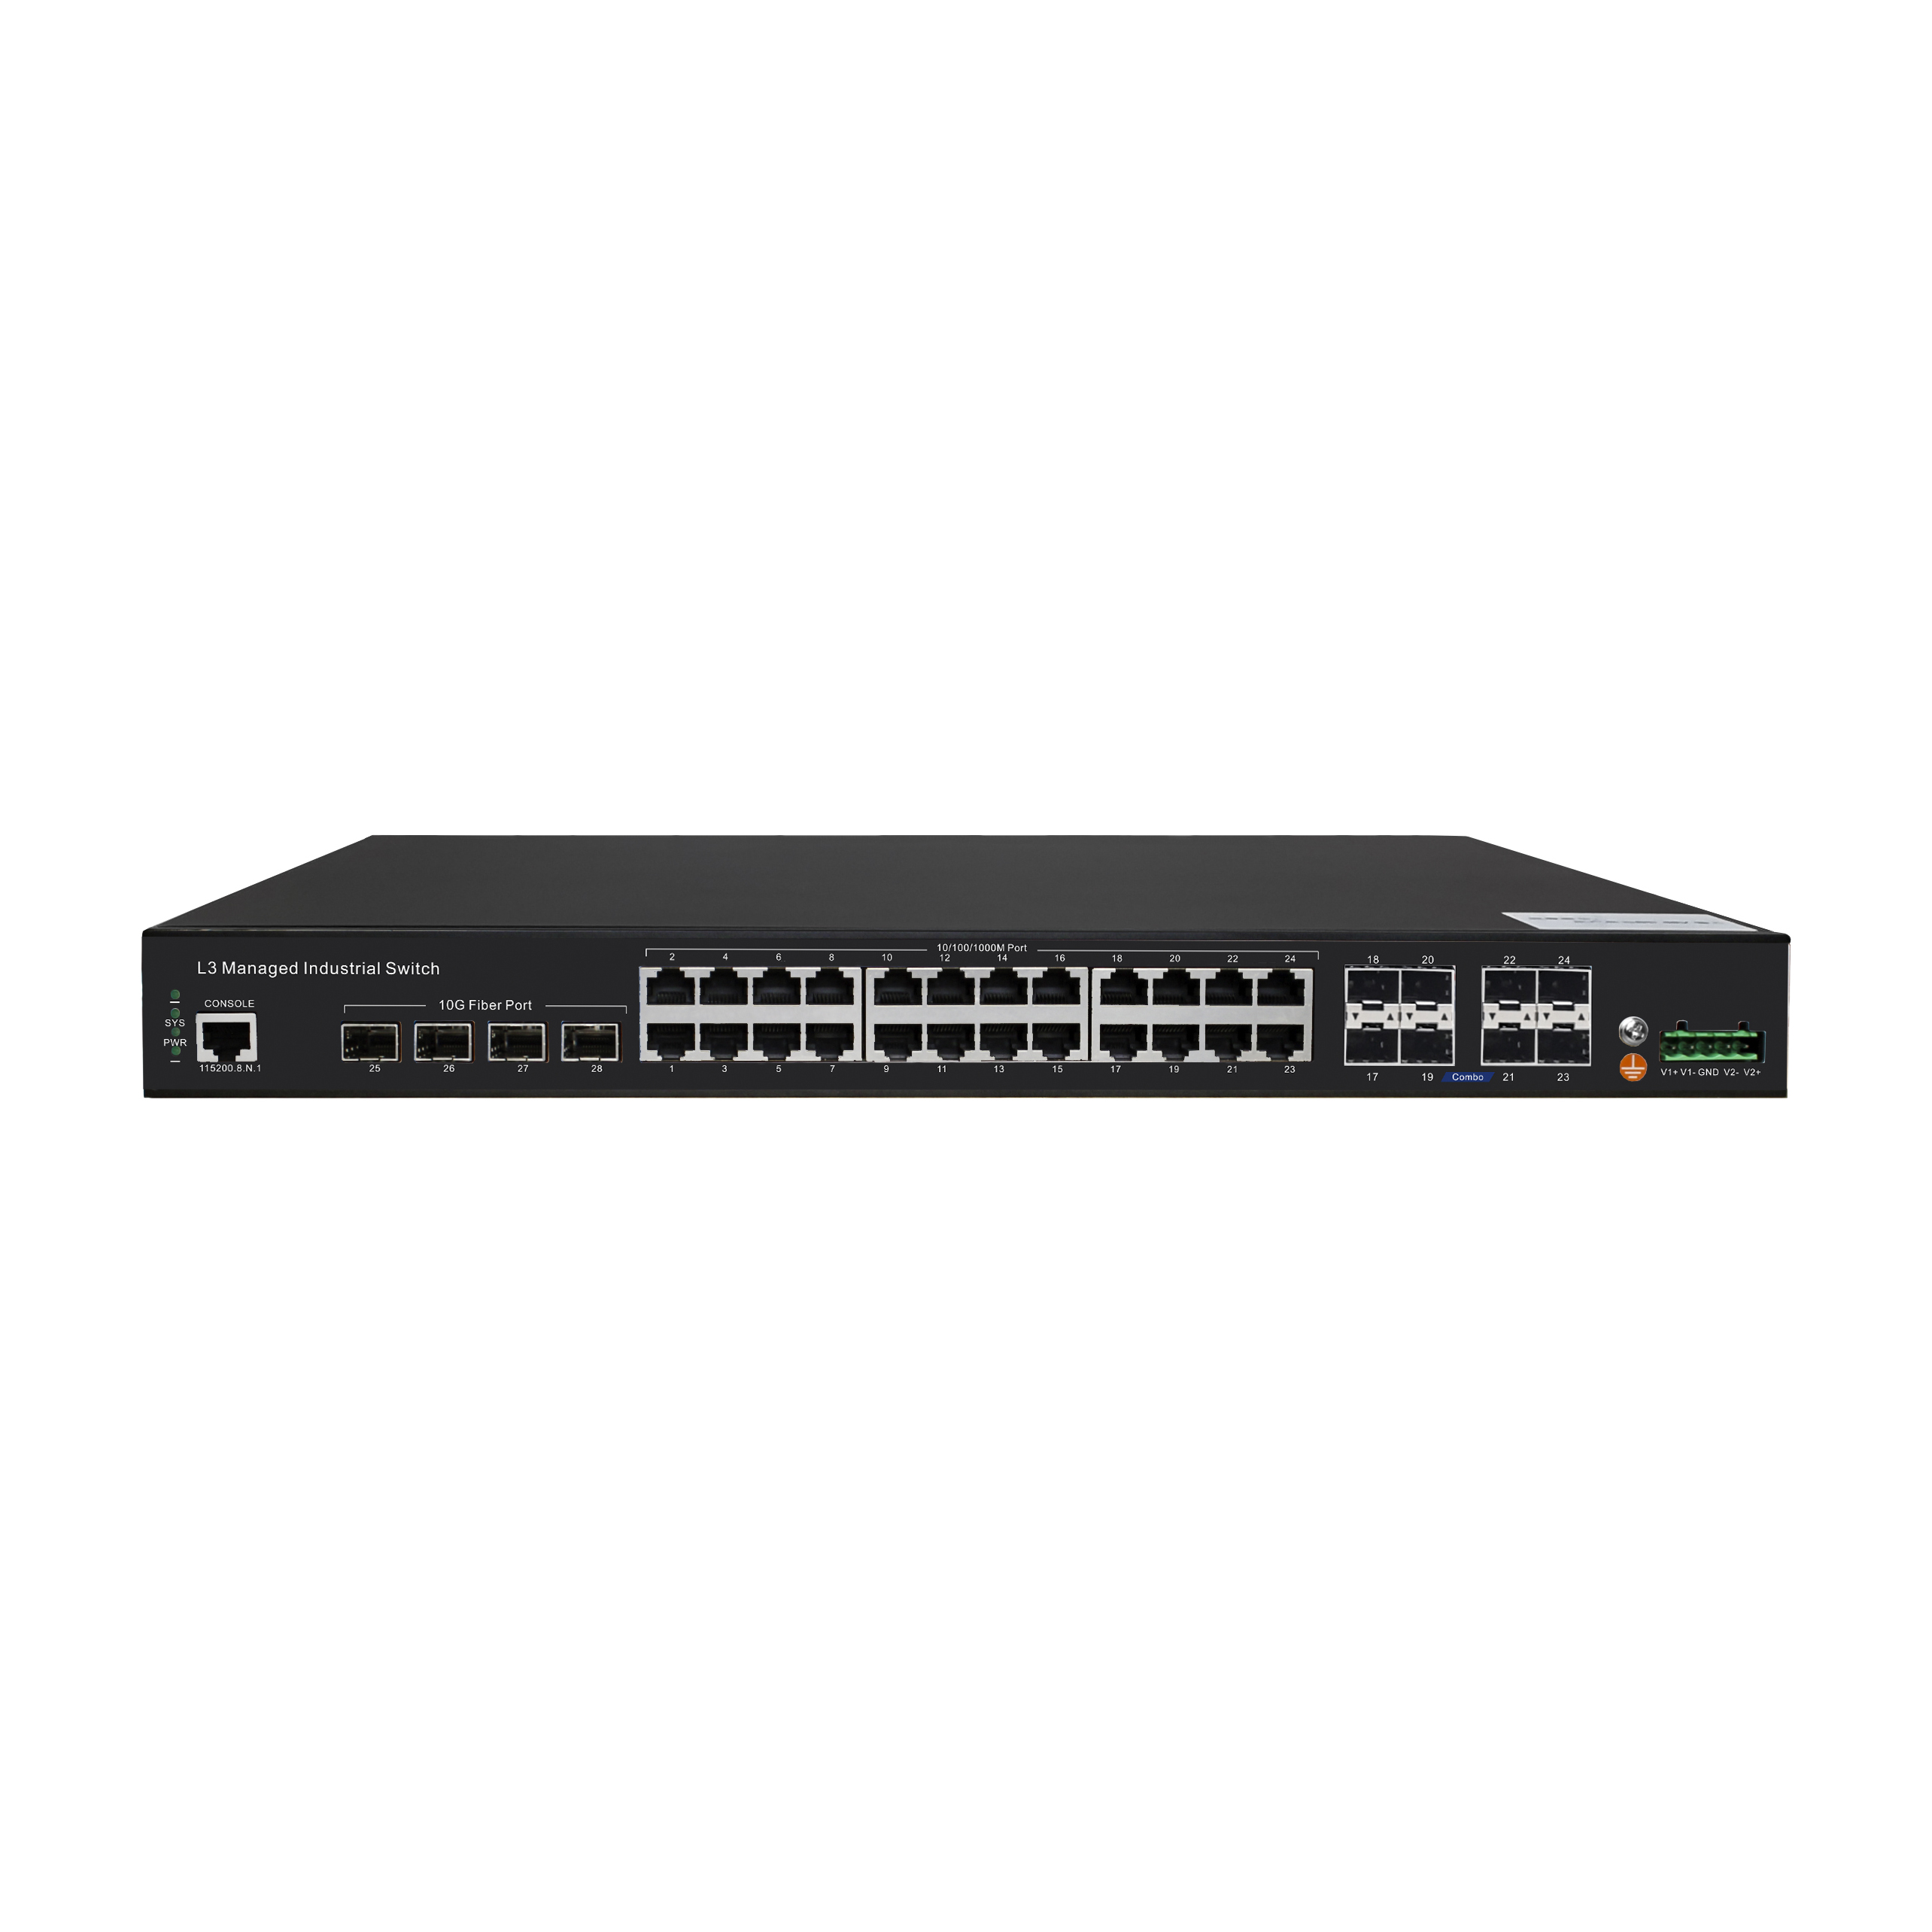 Power over Ethernet Switch with 8 Ports: A Comprehensive Review